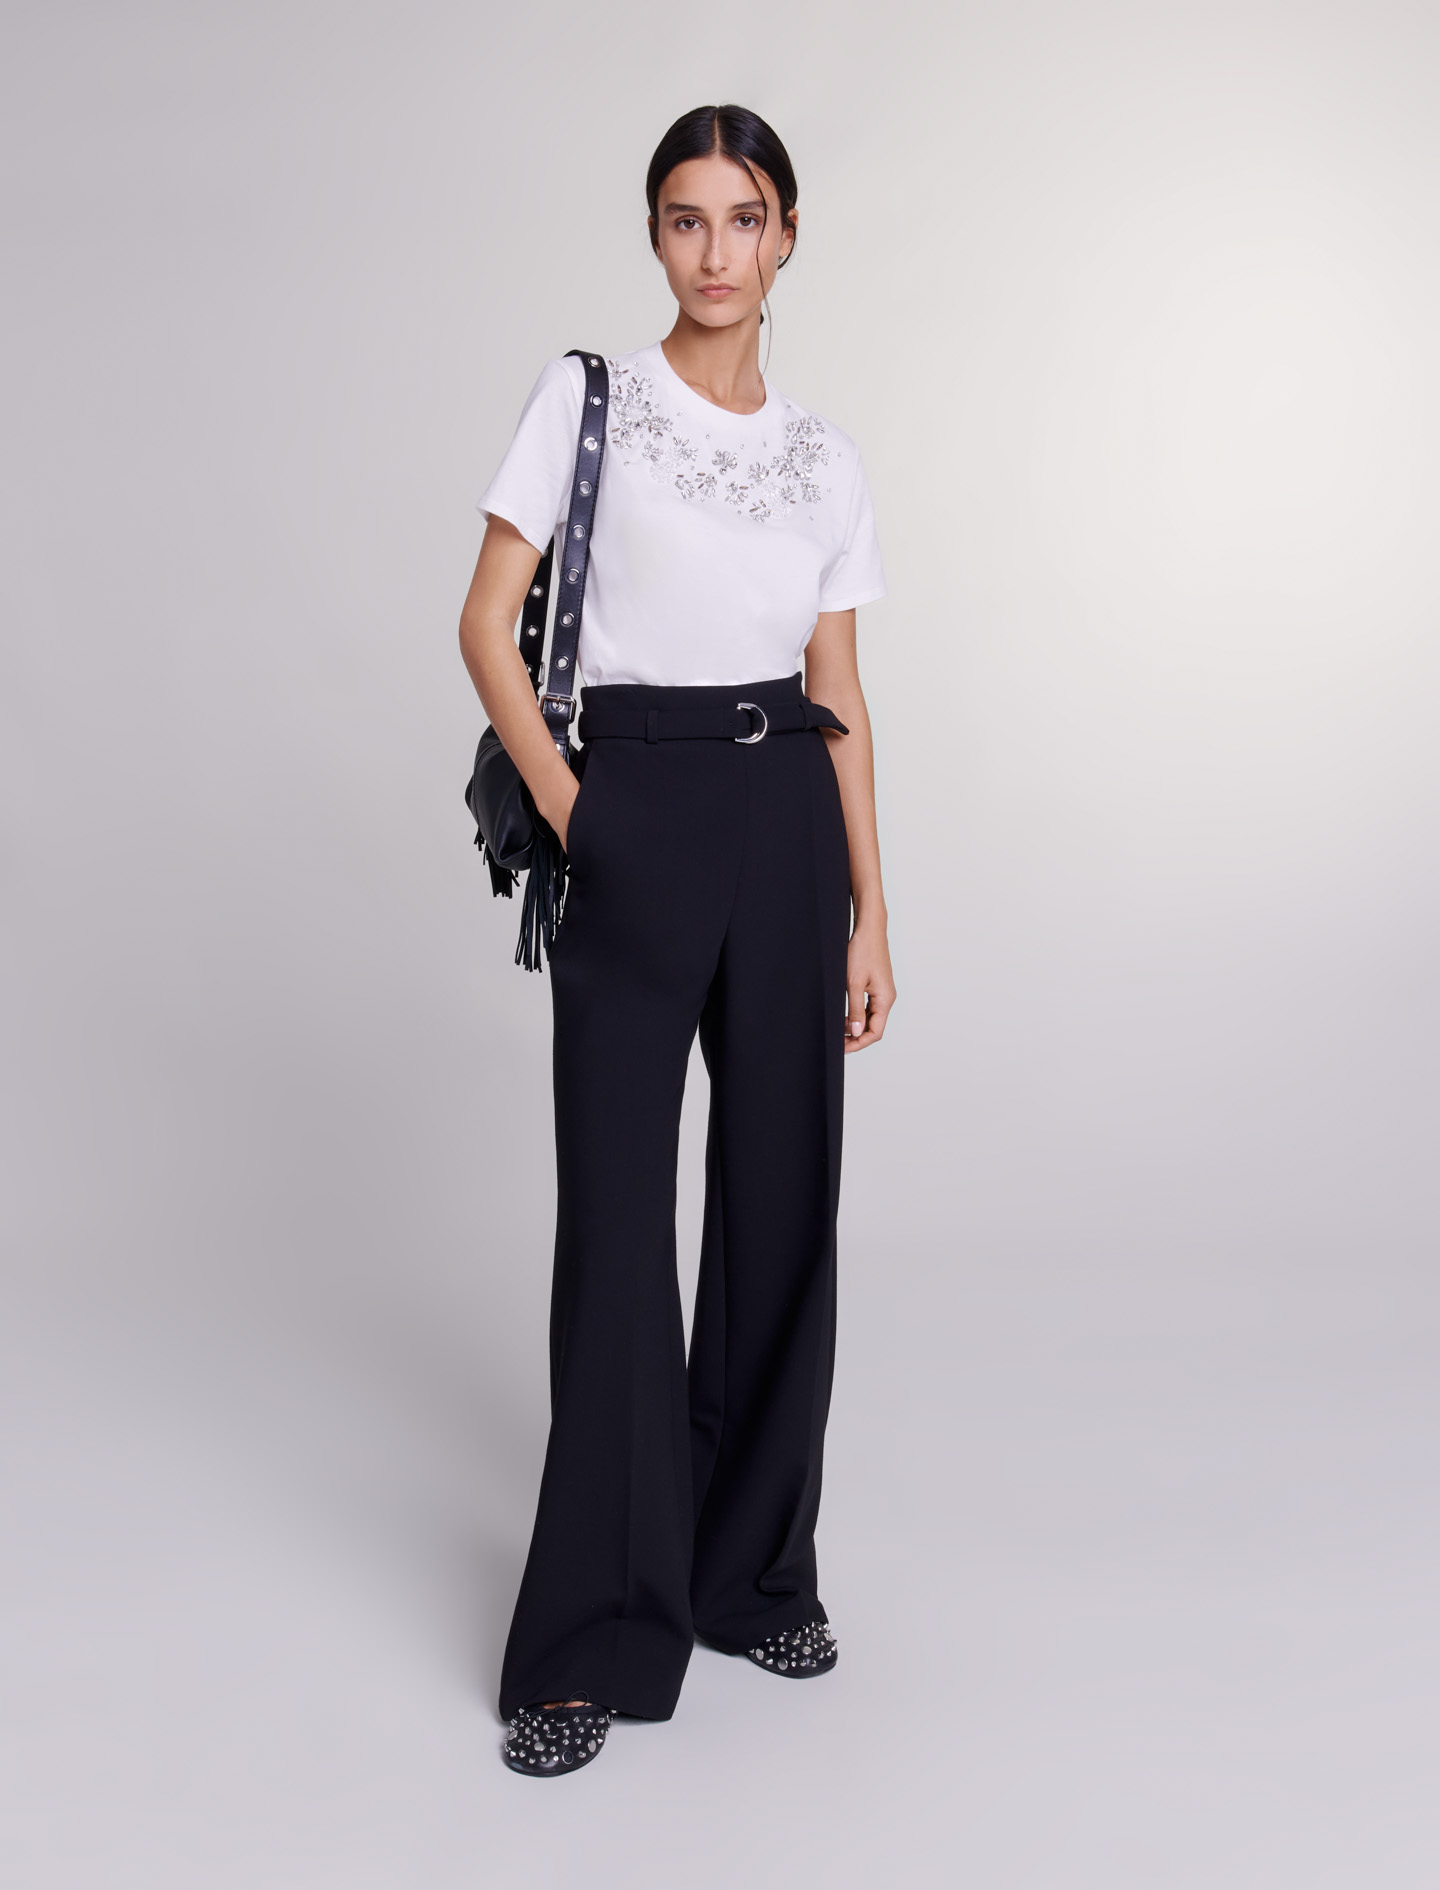 Maje Woman's polyester, Wide leg pants with belt for Spring/Summer, in color Black / Black